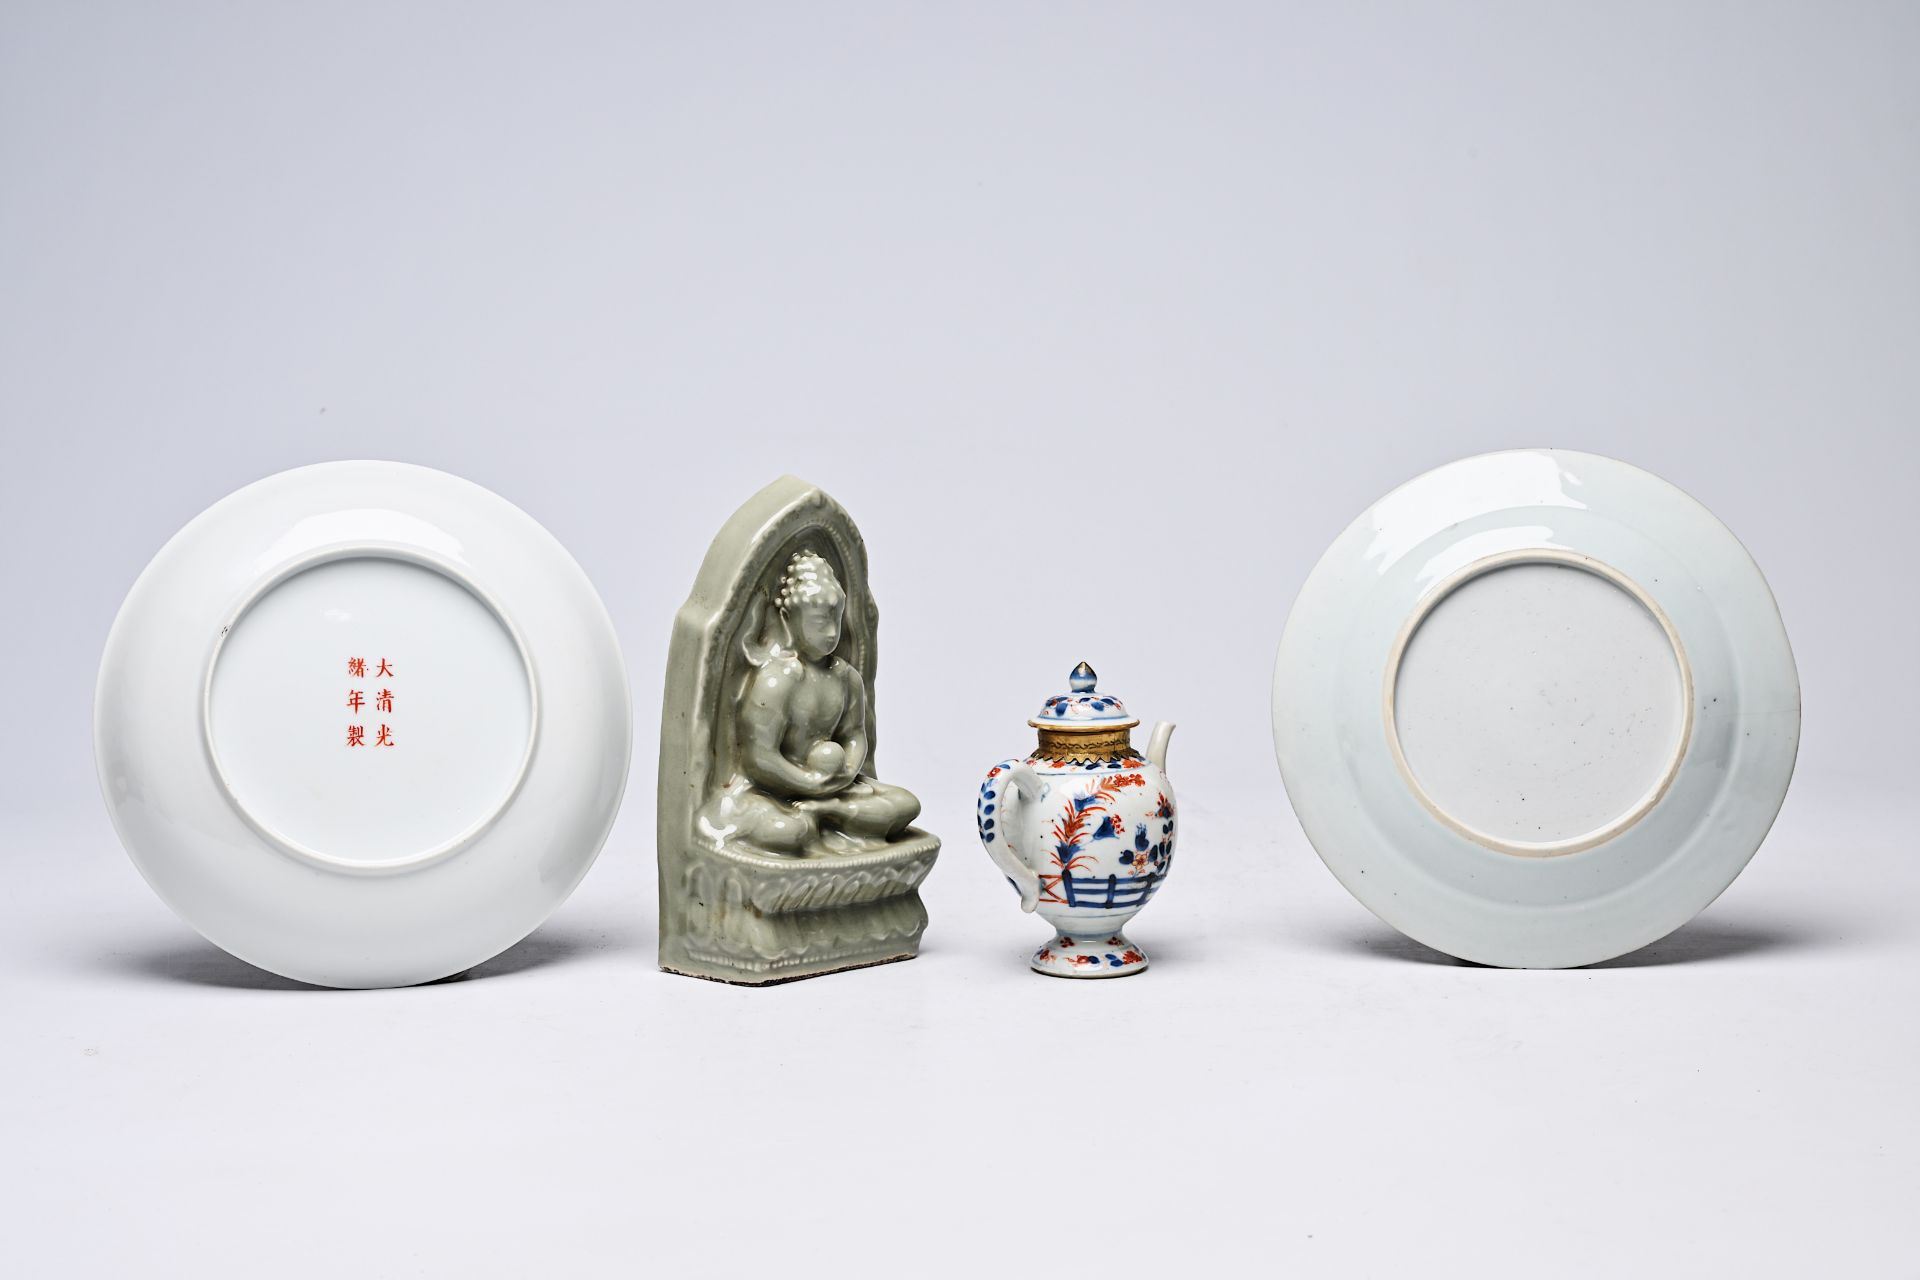 A Chinese Imari style teapot, two famille rose plates with floral design and a celadon 'Buddha' figu - Image 5 of 6